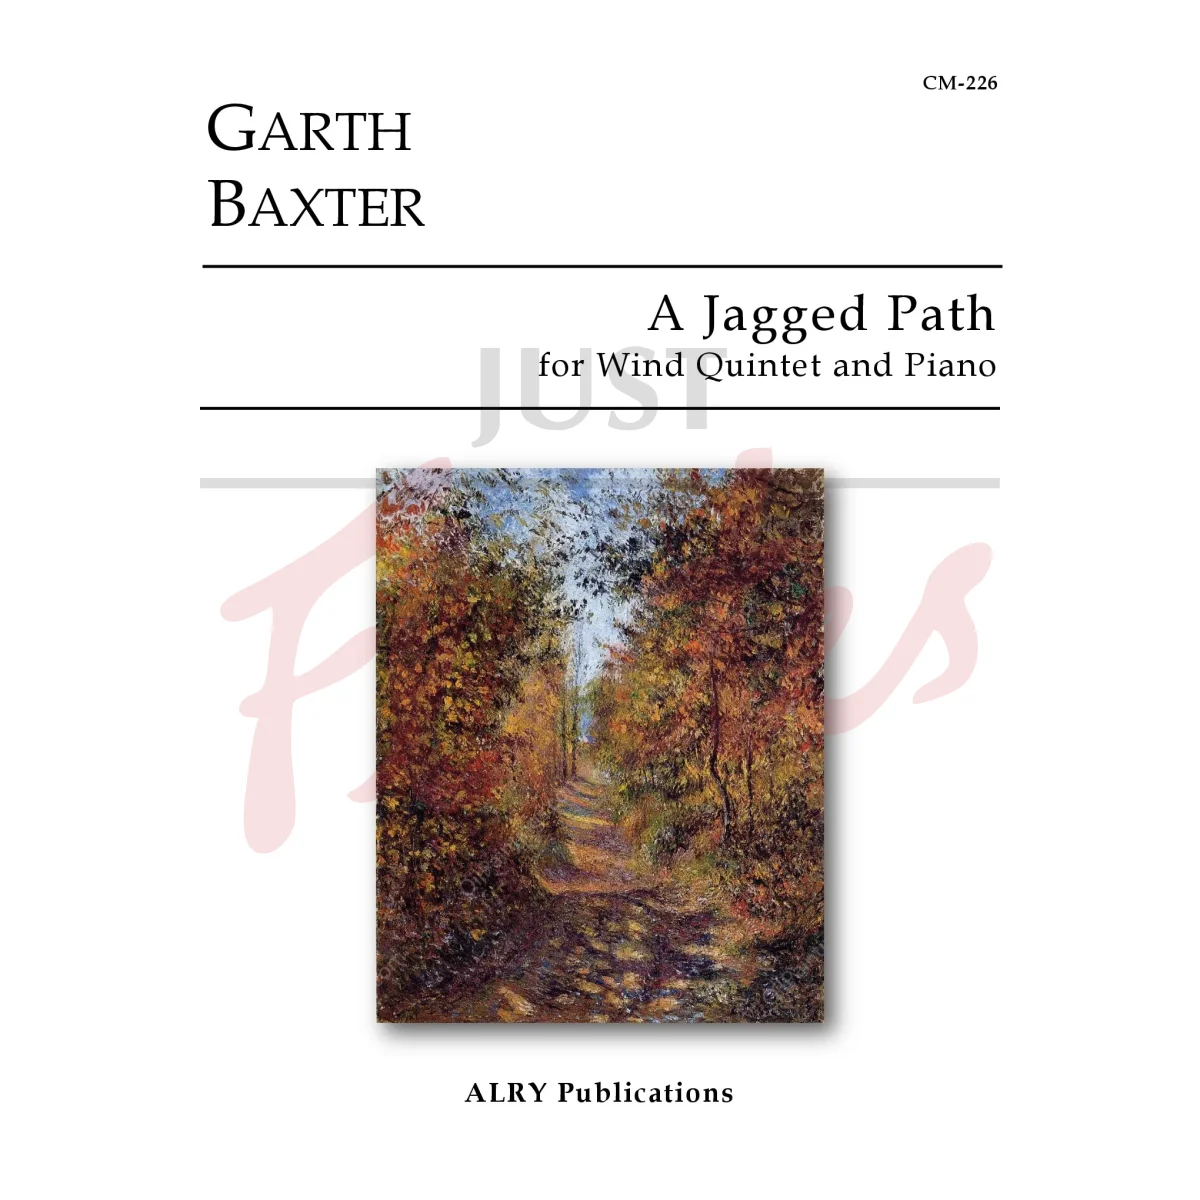 A Jagged Path for Wind Quintet and Piano